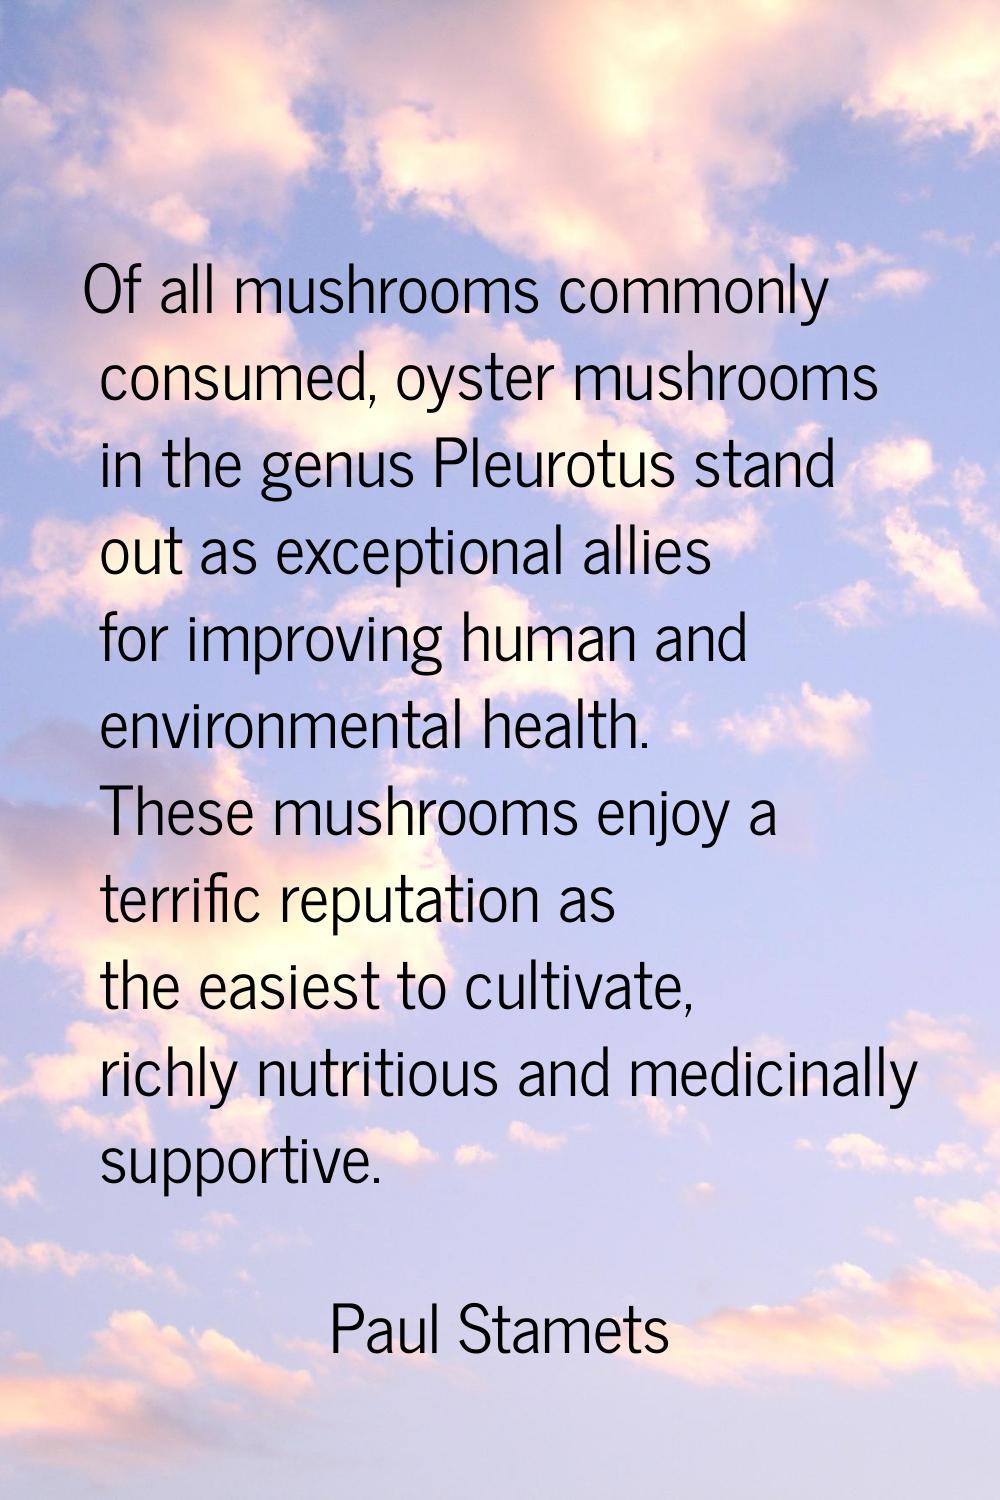 Of all mushrooms commonly consumed, oyster mushrooms in the genus Pleurotus stand out as exceptiona